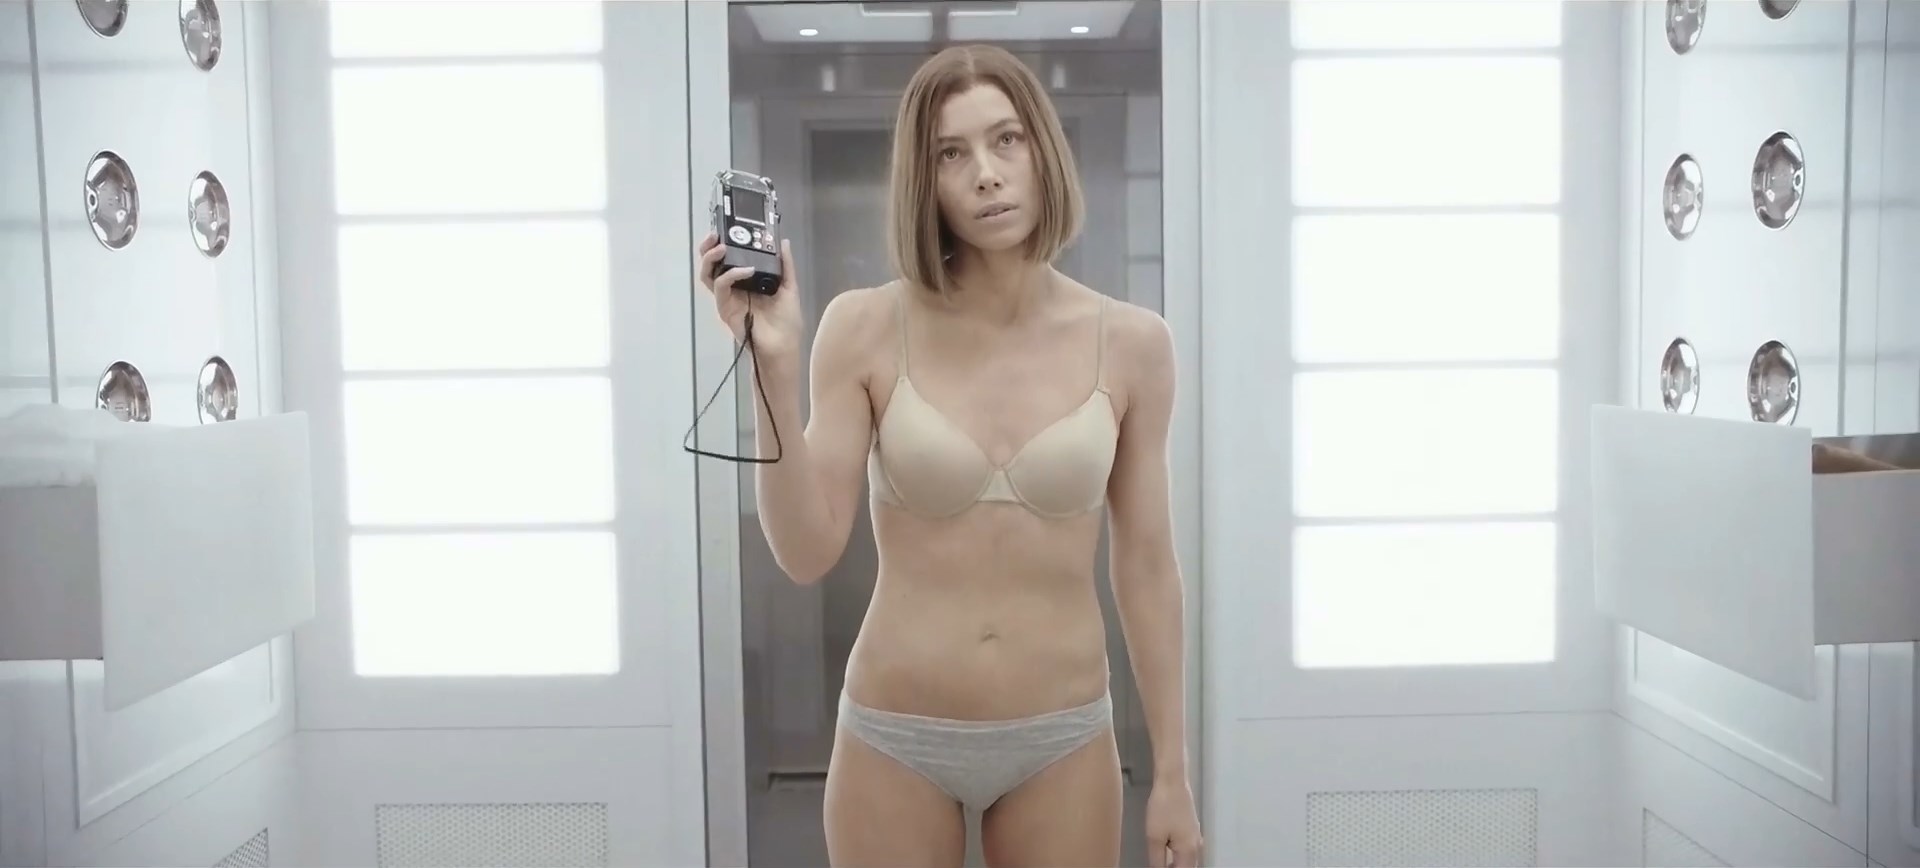 Jessica Biel is very sexy in the show “Limetown” season 1 episode 5 which w...